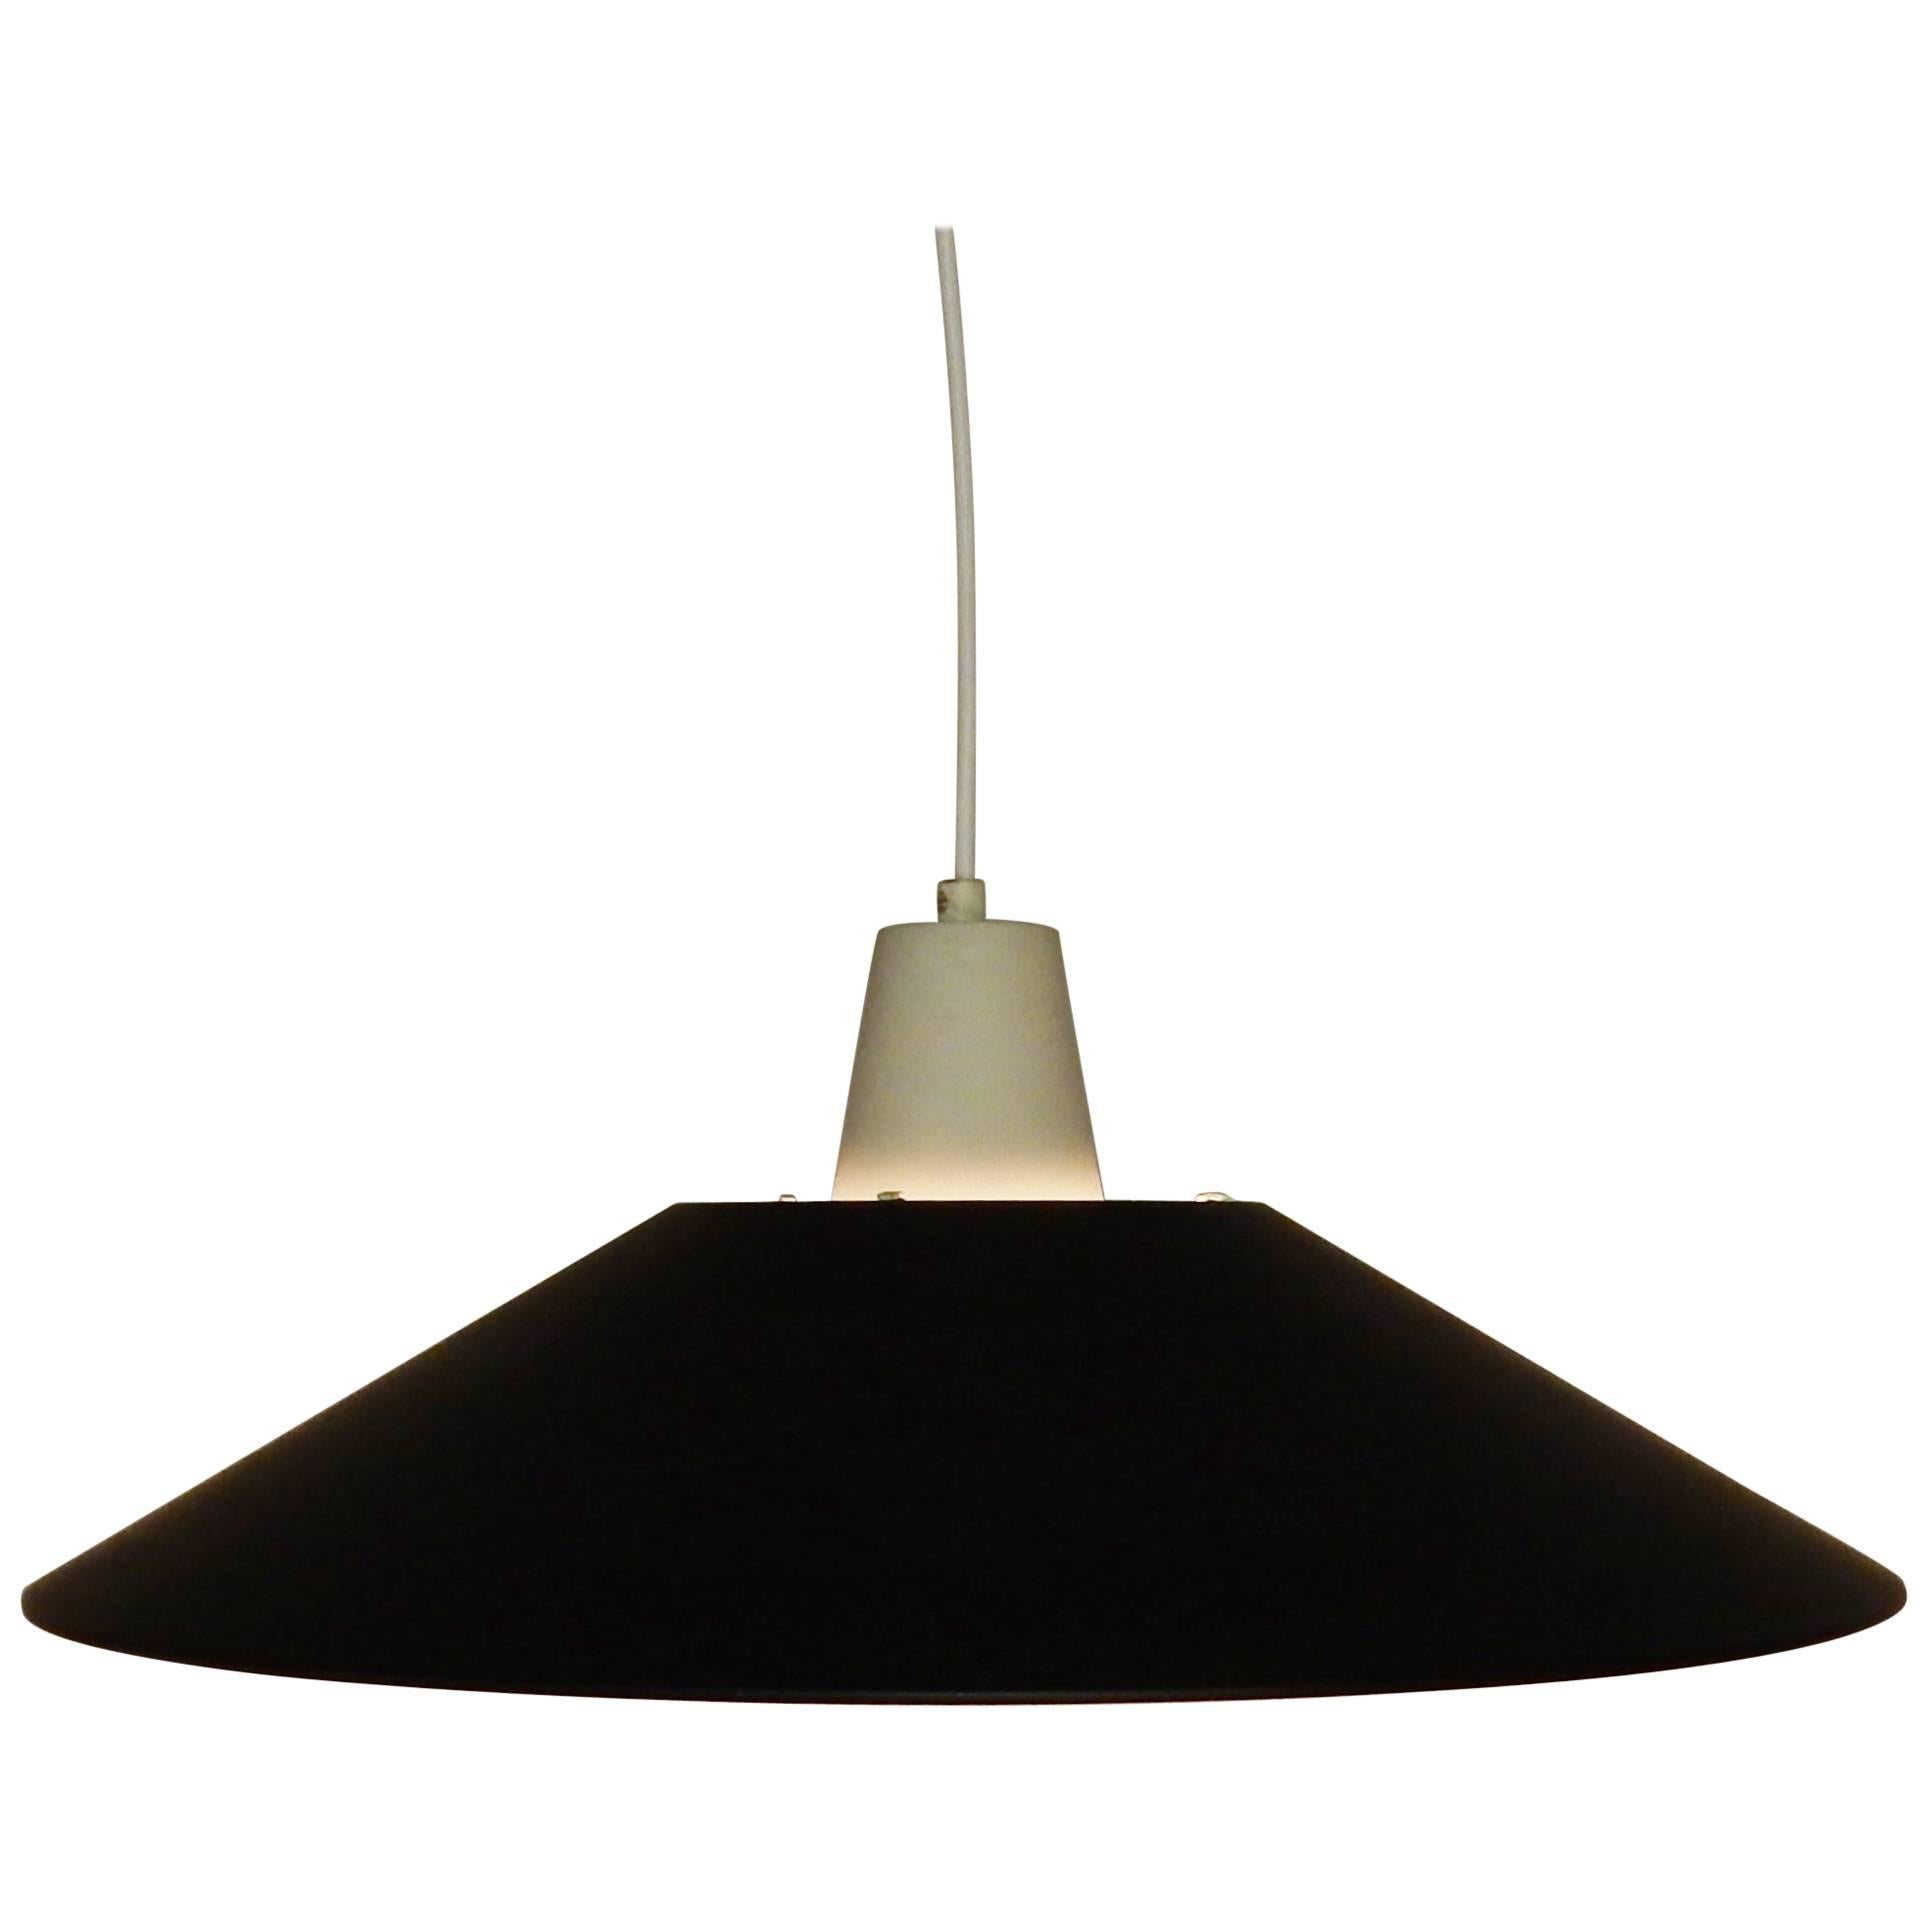 Mid-Century Pendant Light in Black and White Lacquered Metal, 1950s-1960s For Sale